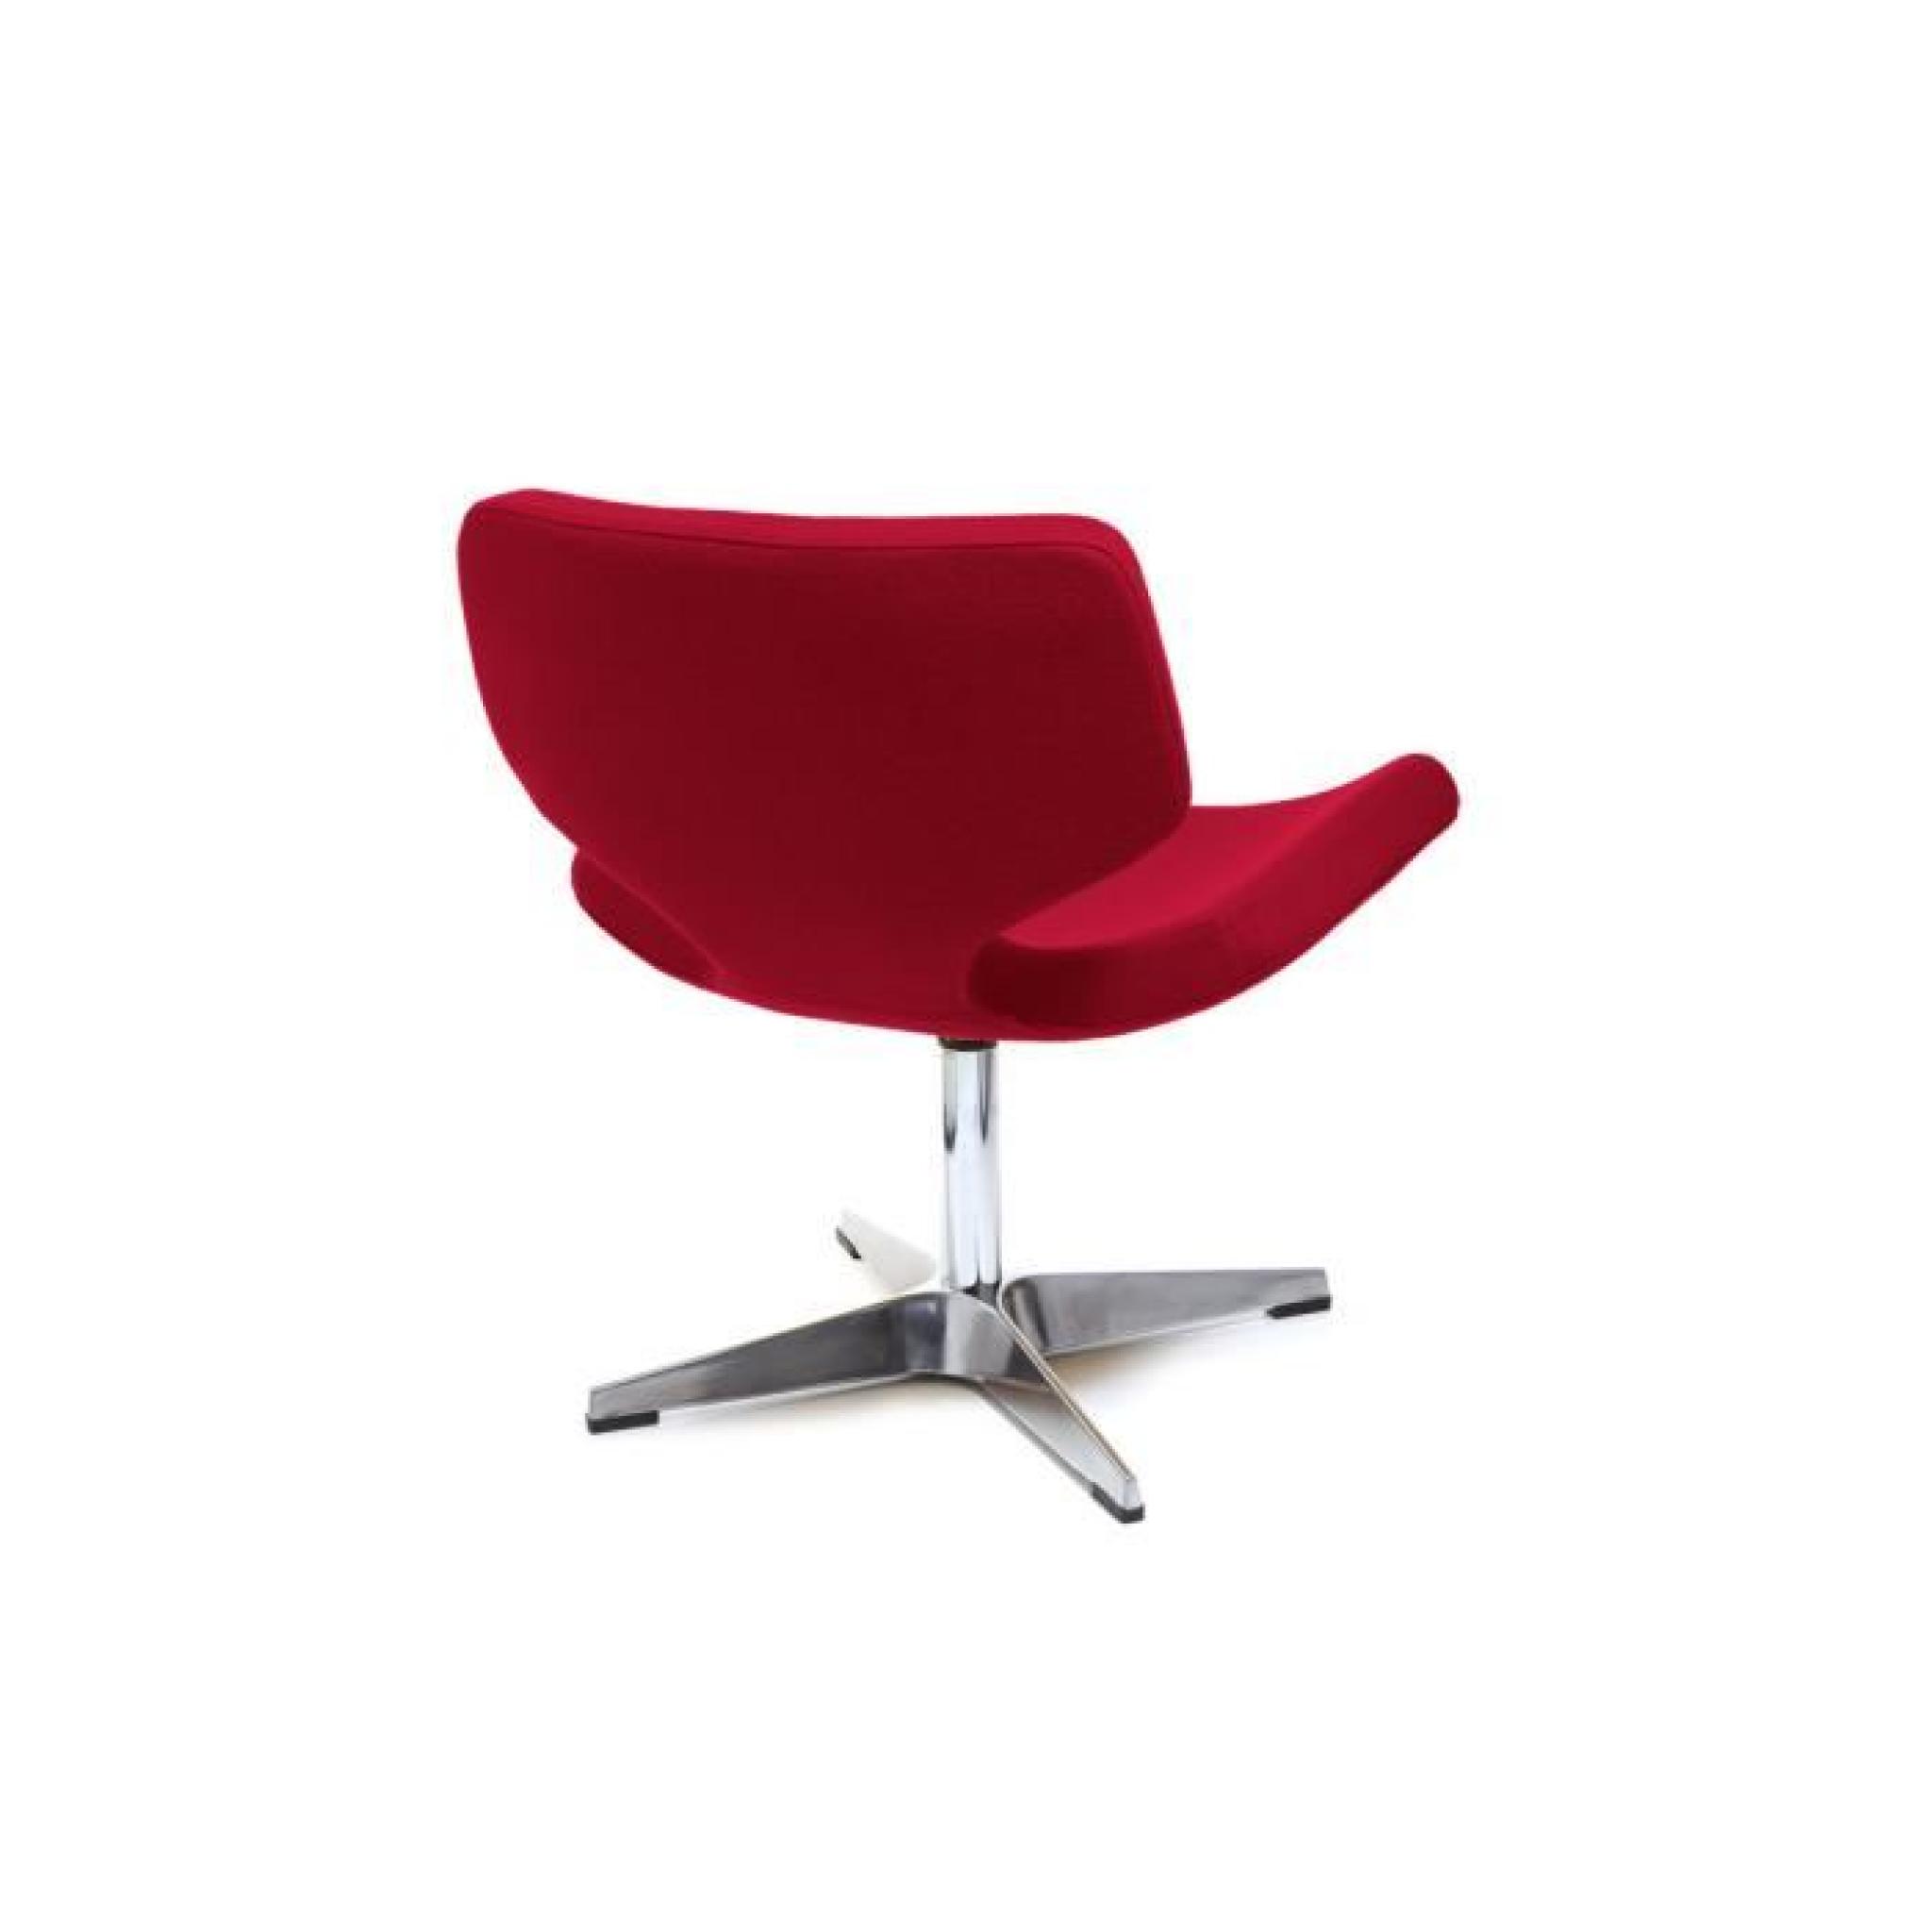 Miliboo - Chaise design polyester rouge et pied… pas cher